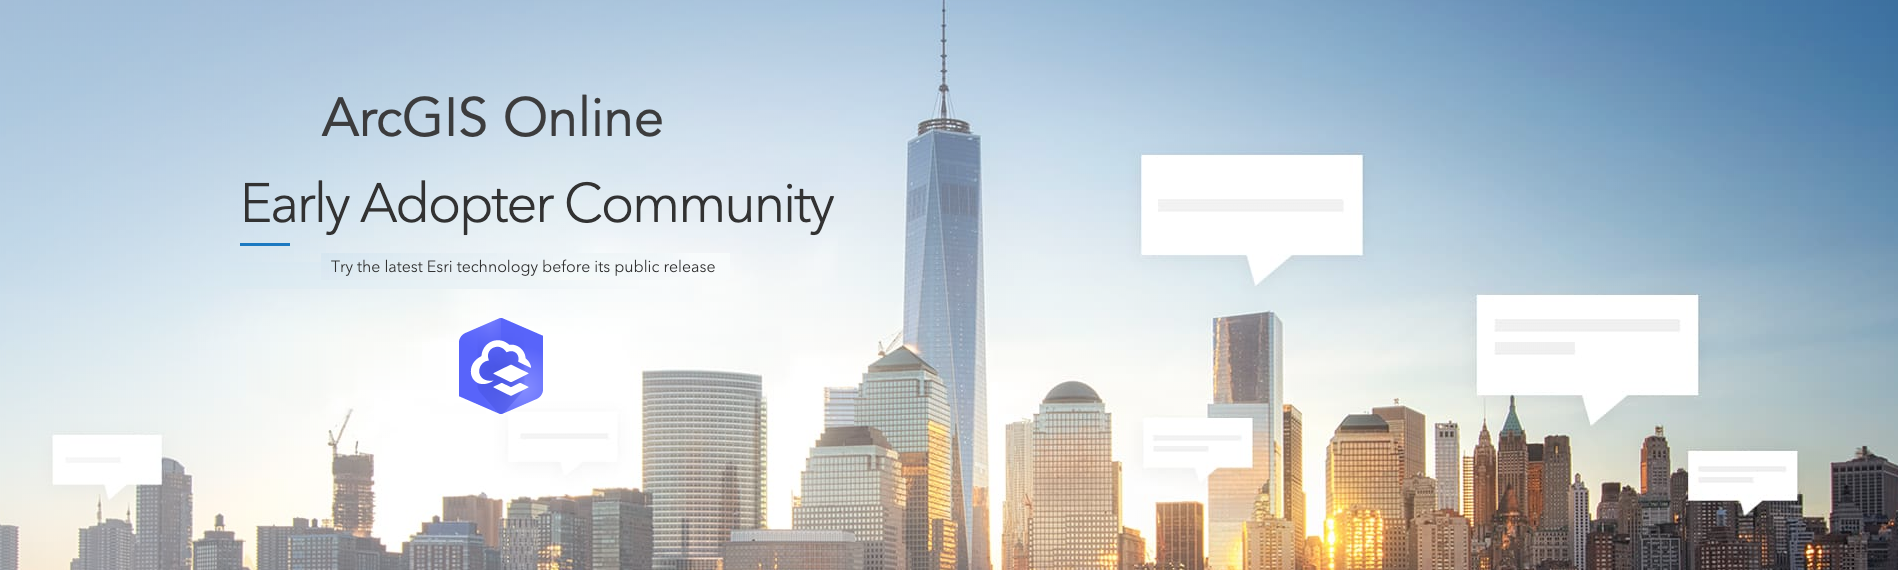 ArcGIS Online Early Adopter Community